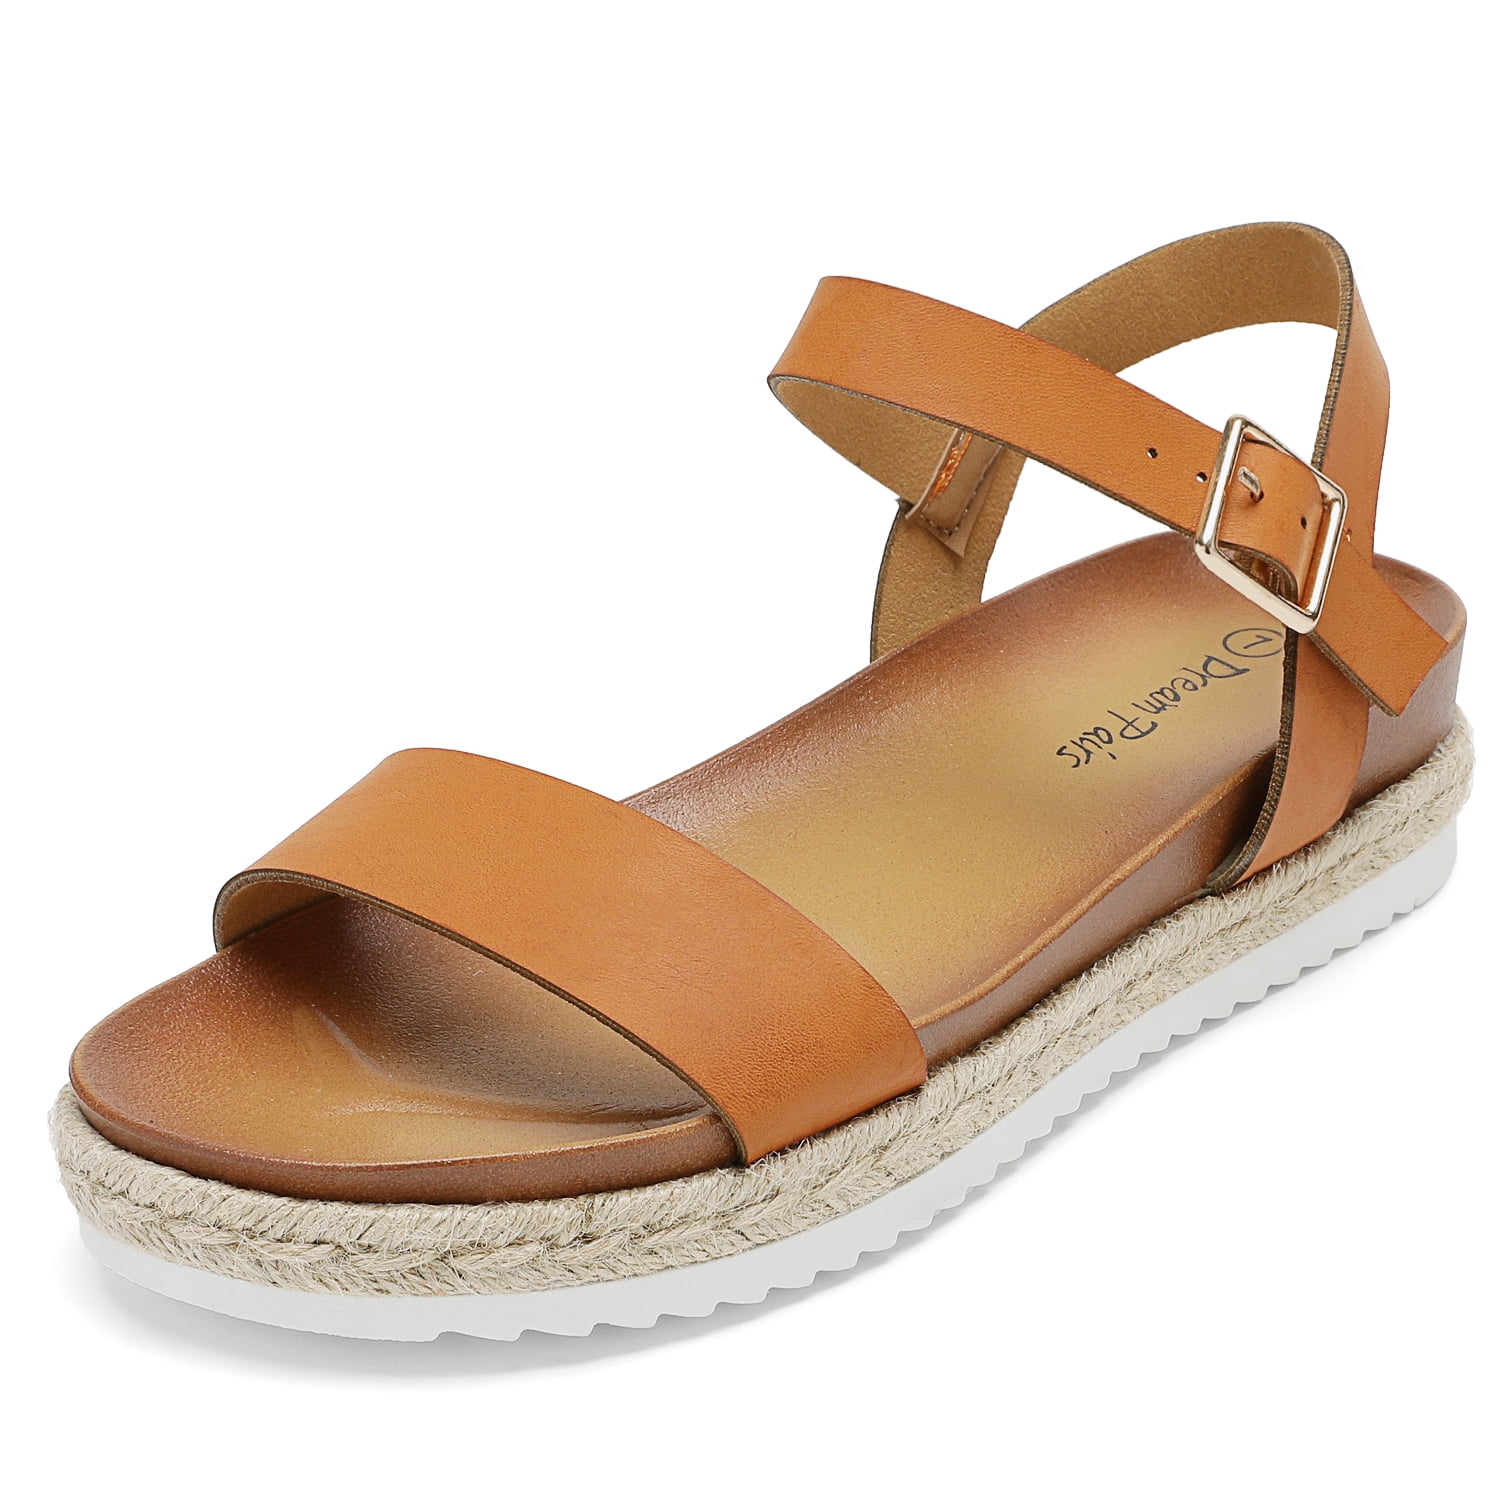 Oh My Sandals - 5224 Tan Leather Wedge Sandal – Murphys Shoe Store Limited